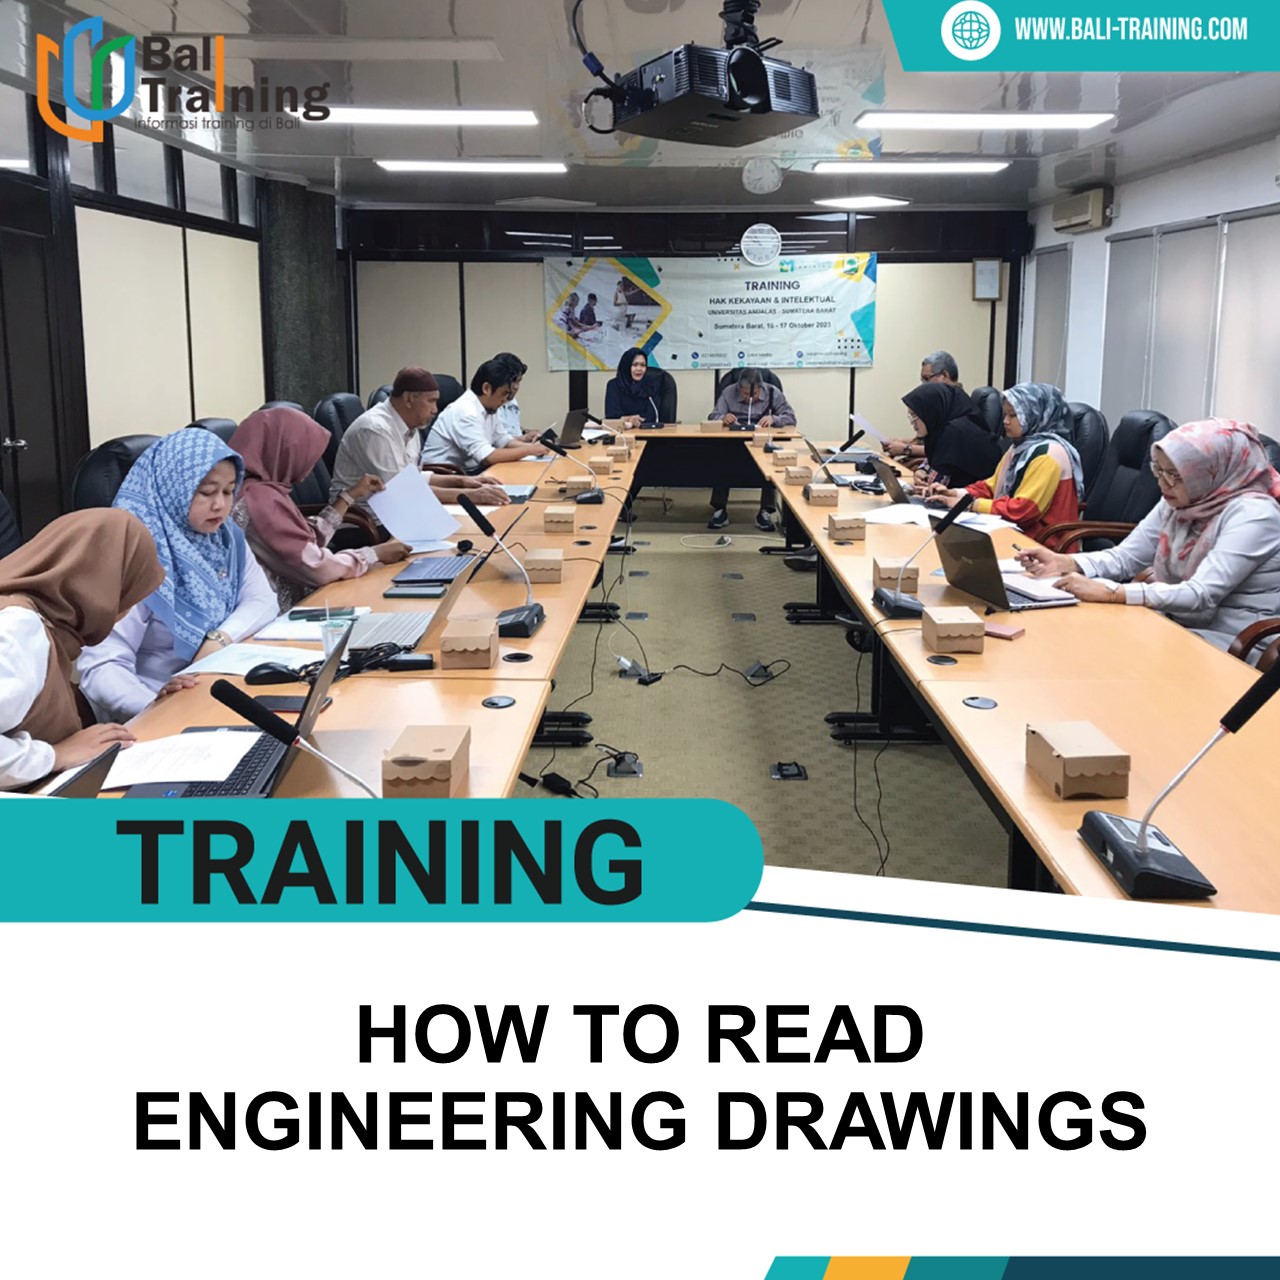 TRAINING HOW TO READ ENGINEERING DRAWINGS